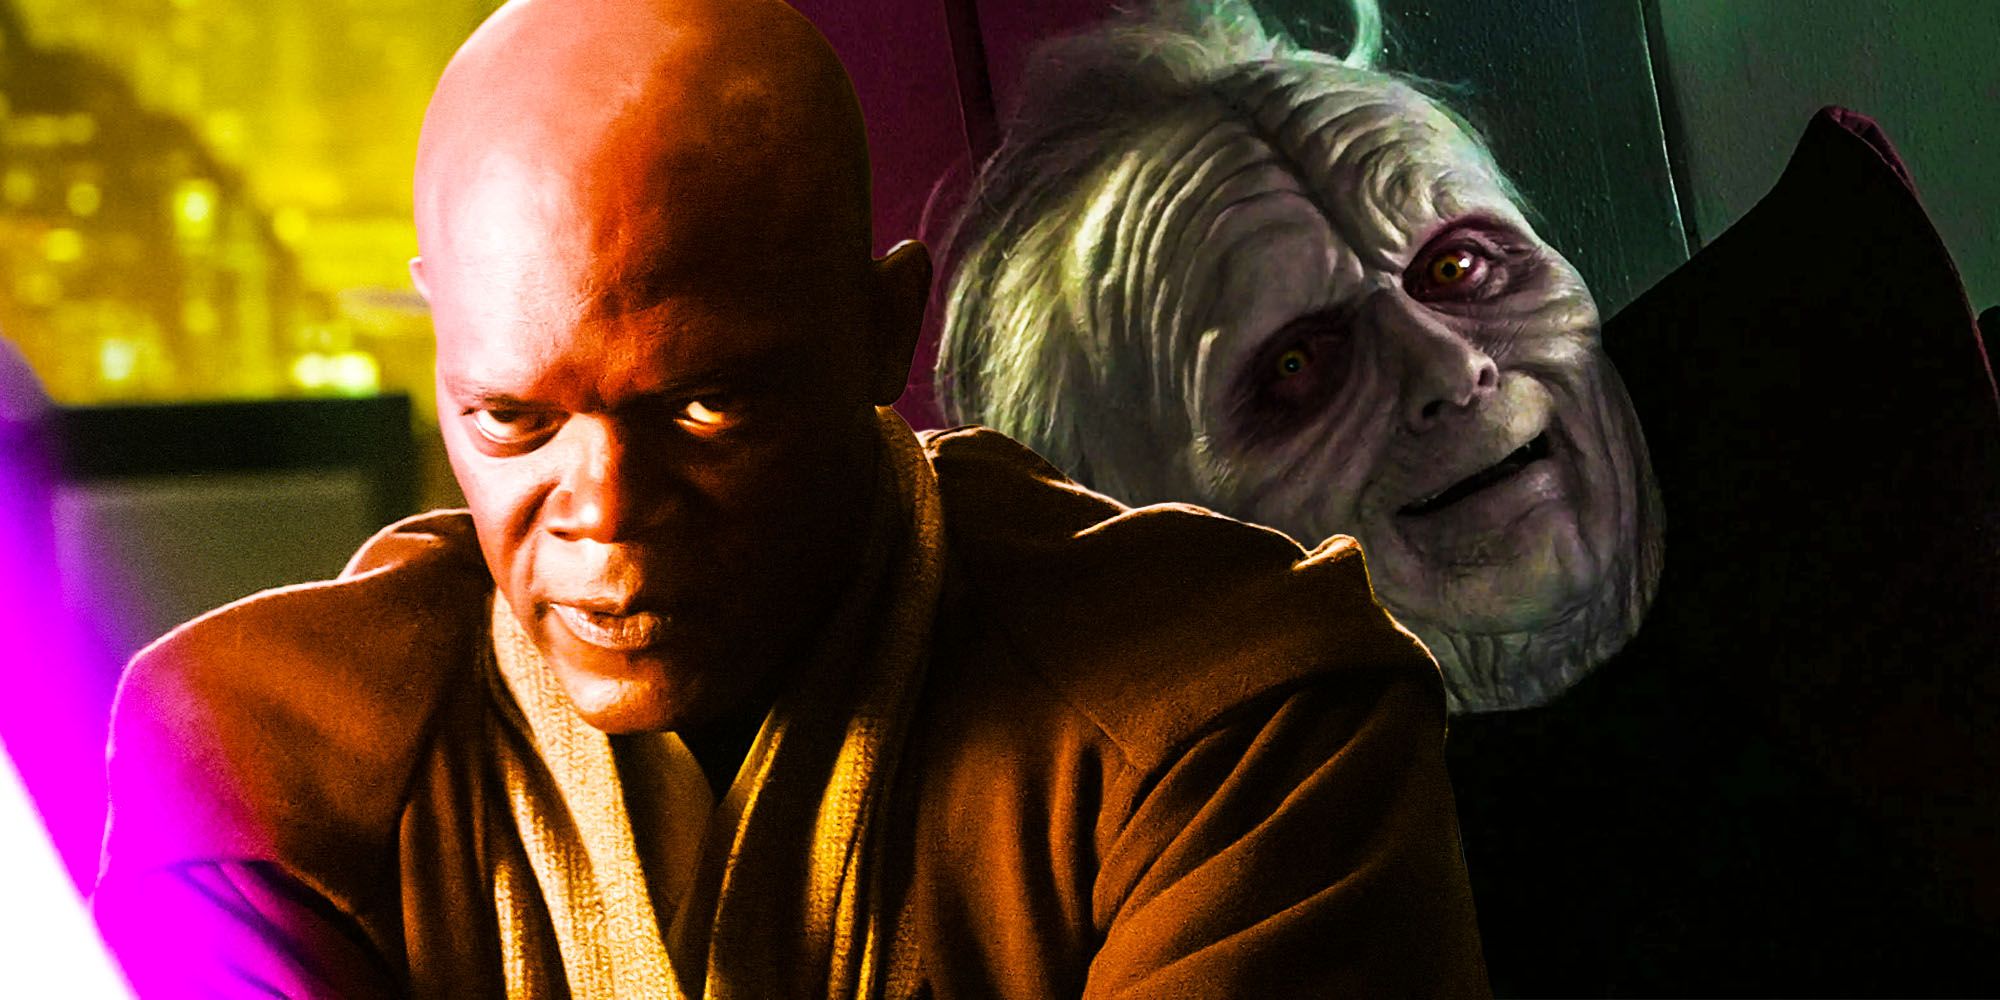 mace windu and palpatine in revenge of the sith